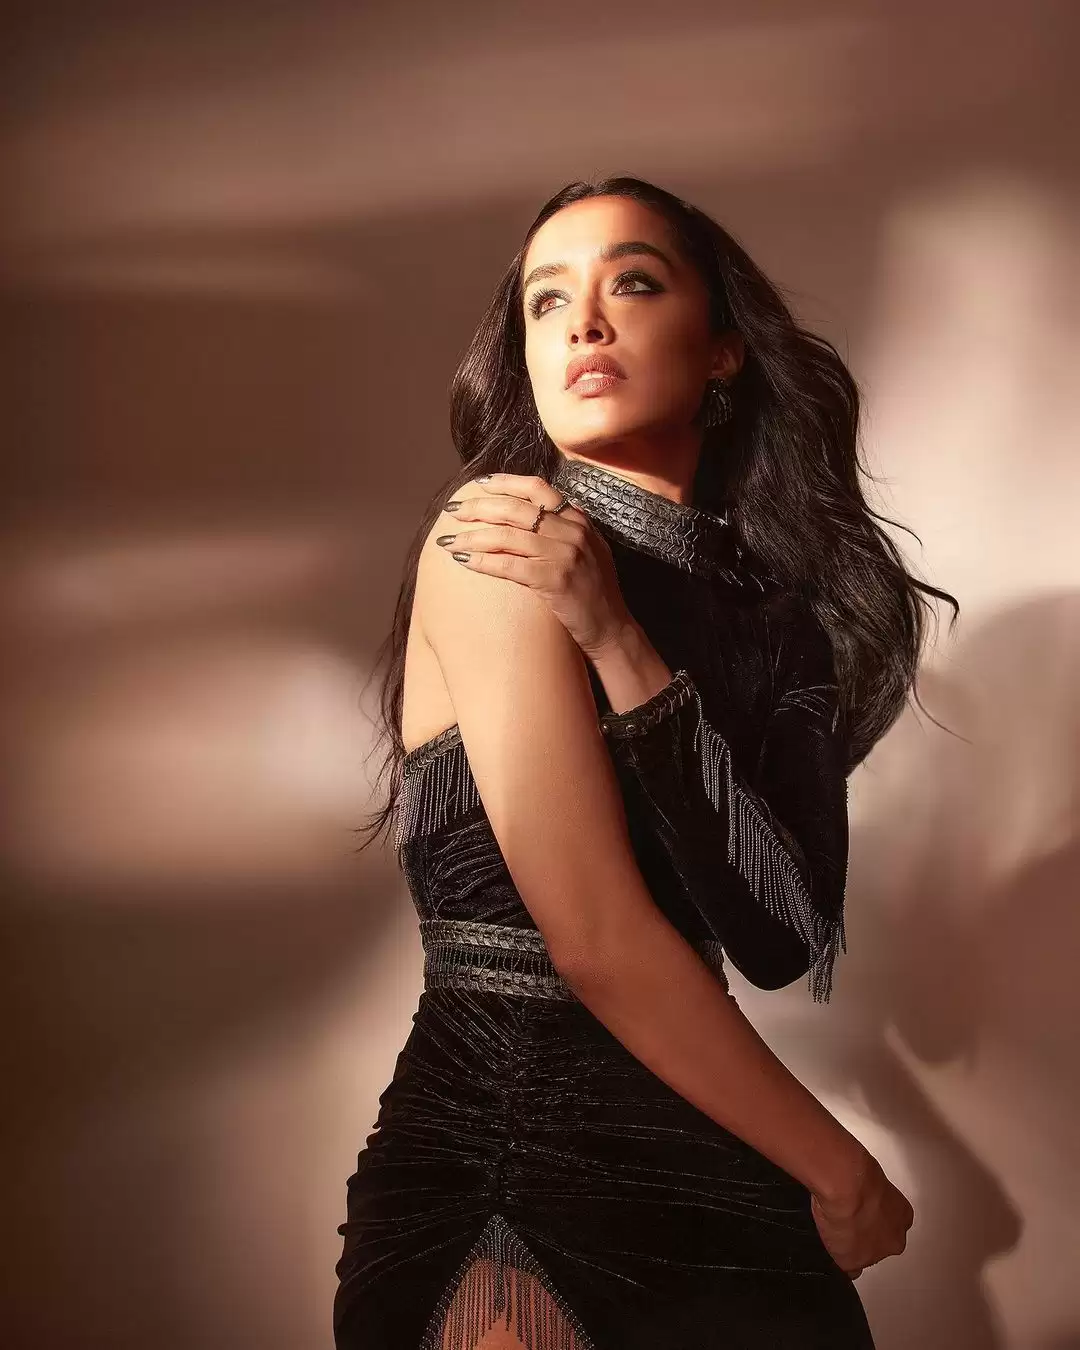 Actress Shraddha Kapoor’s bewitching pictures go viral.